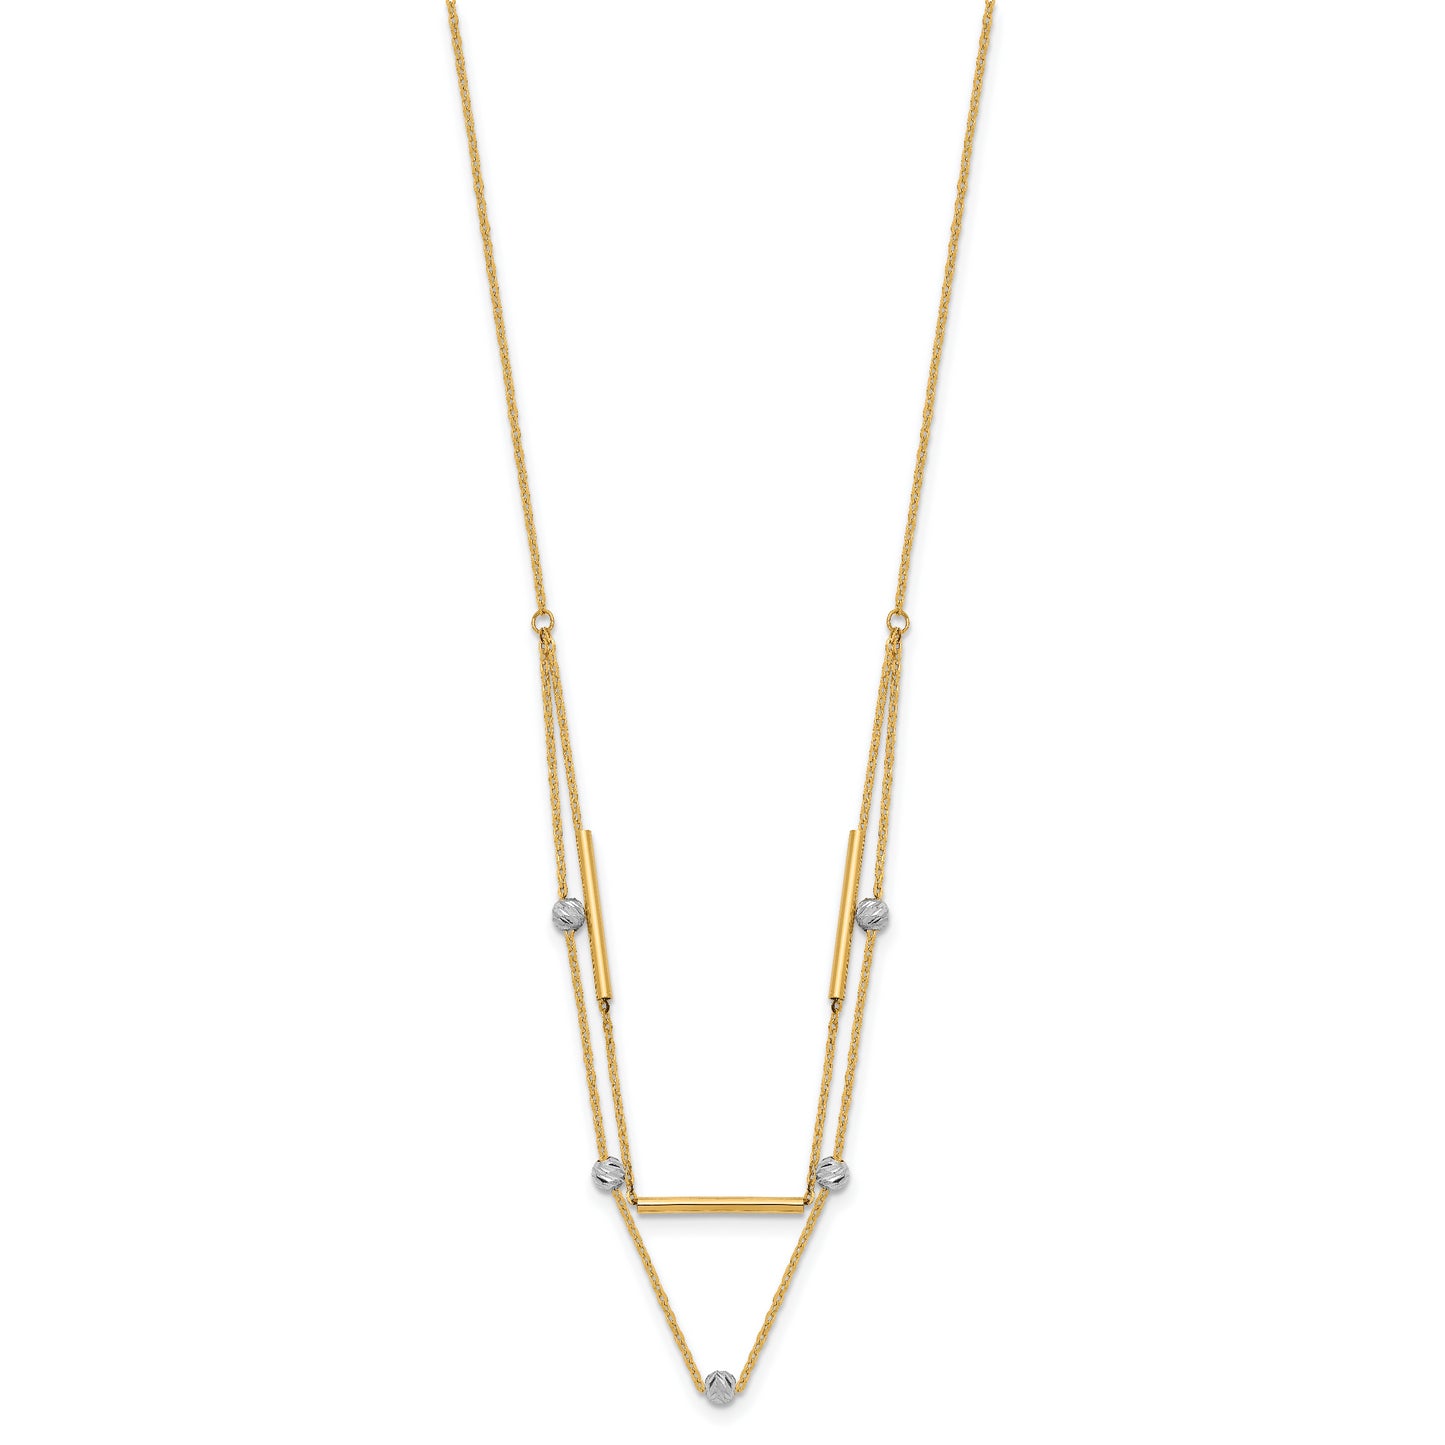 14K Two-tone D/C Beads Fancy 17in Necklace